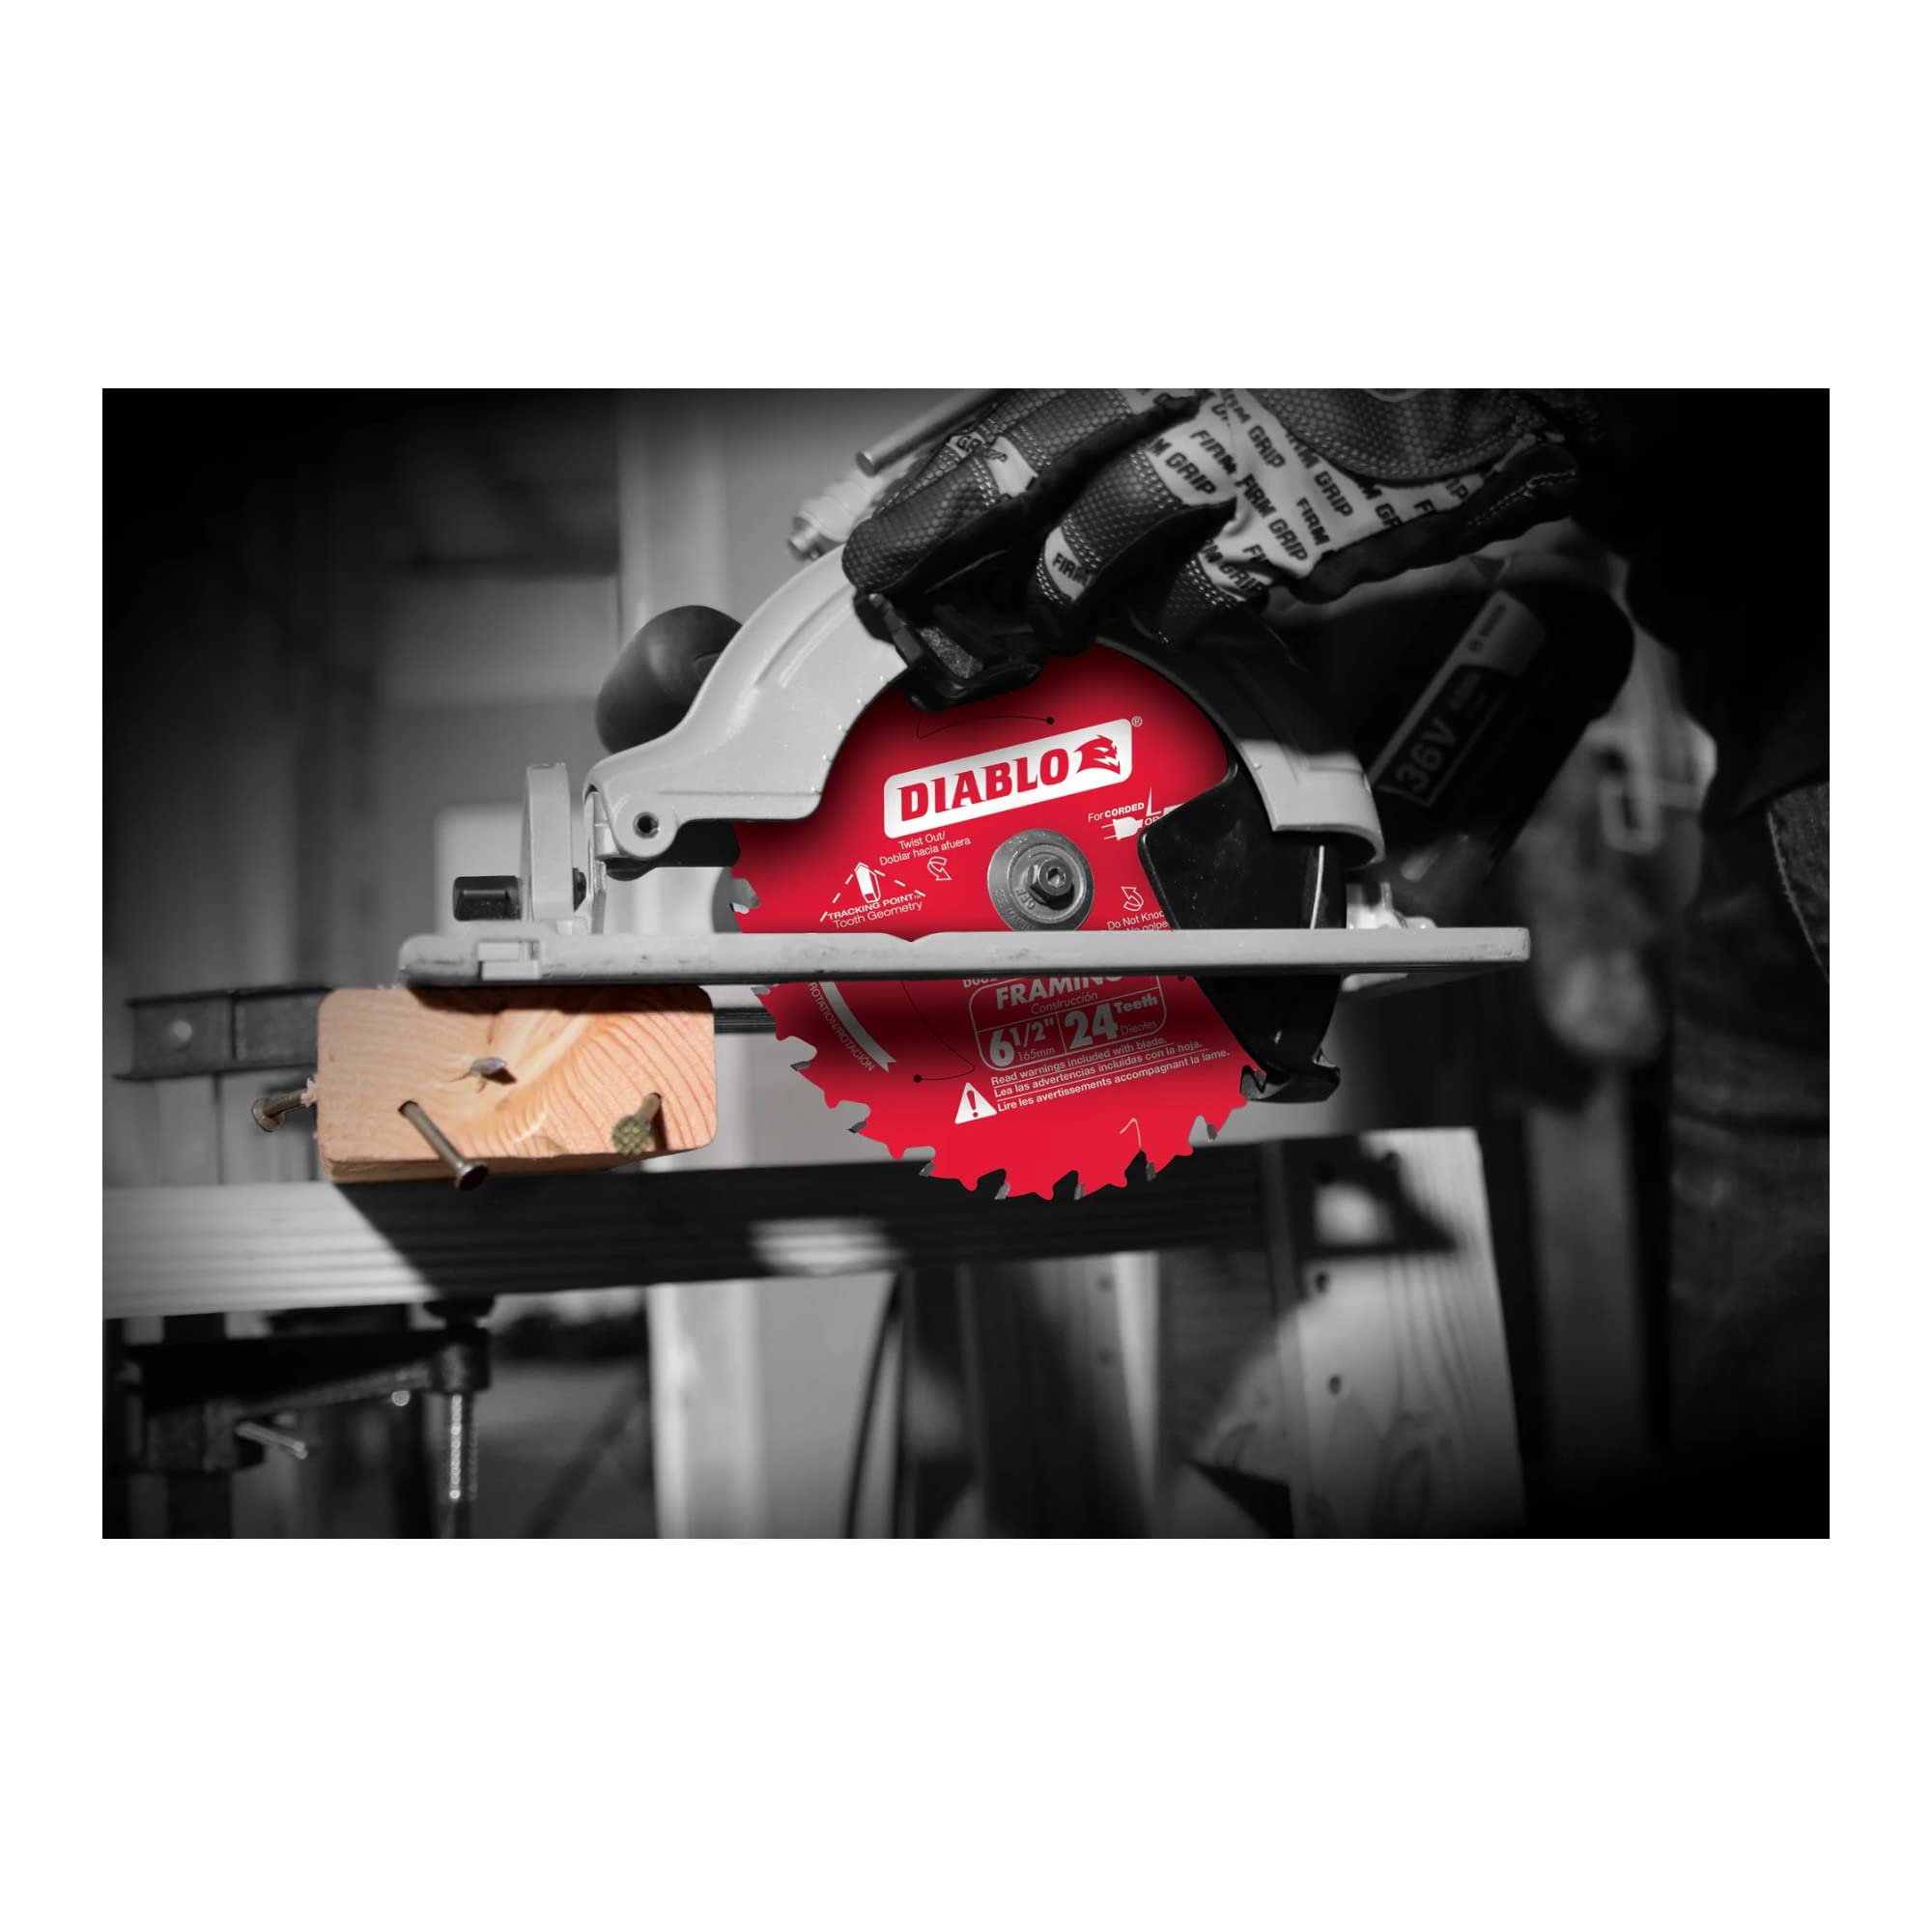 Wholesale freud tool Available For Different Types Of Saws 